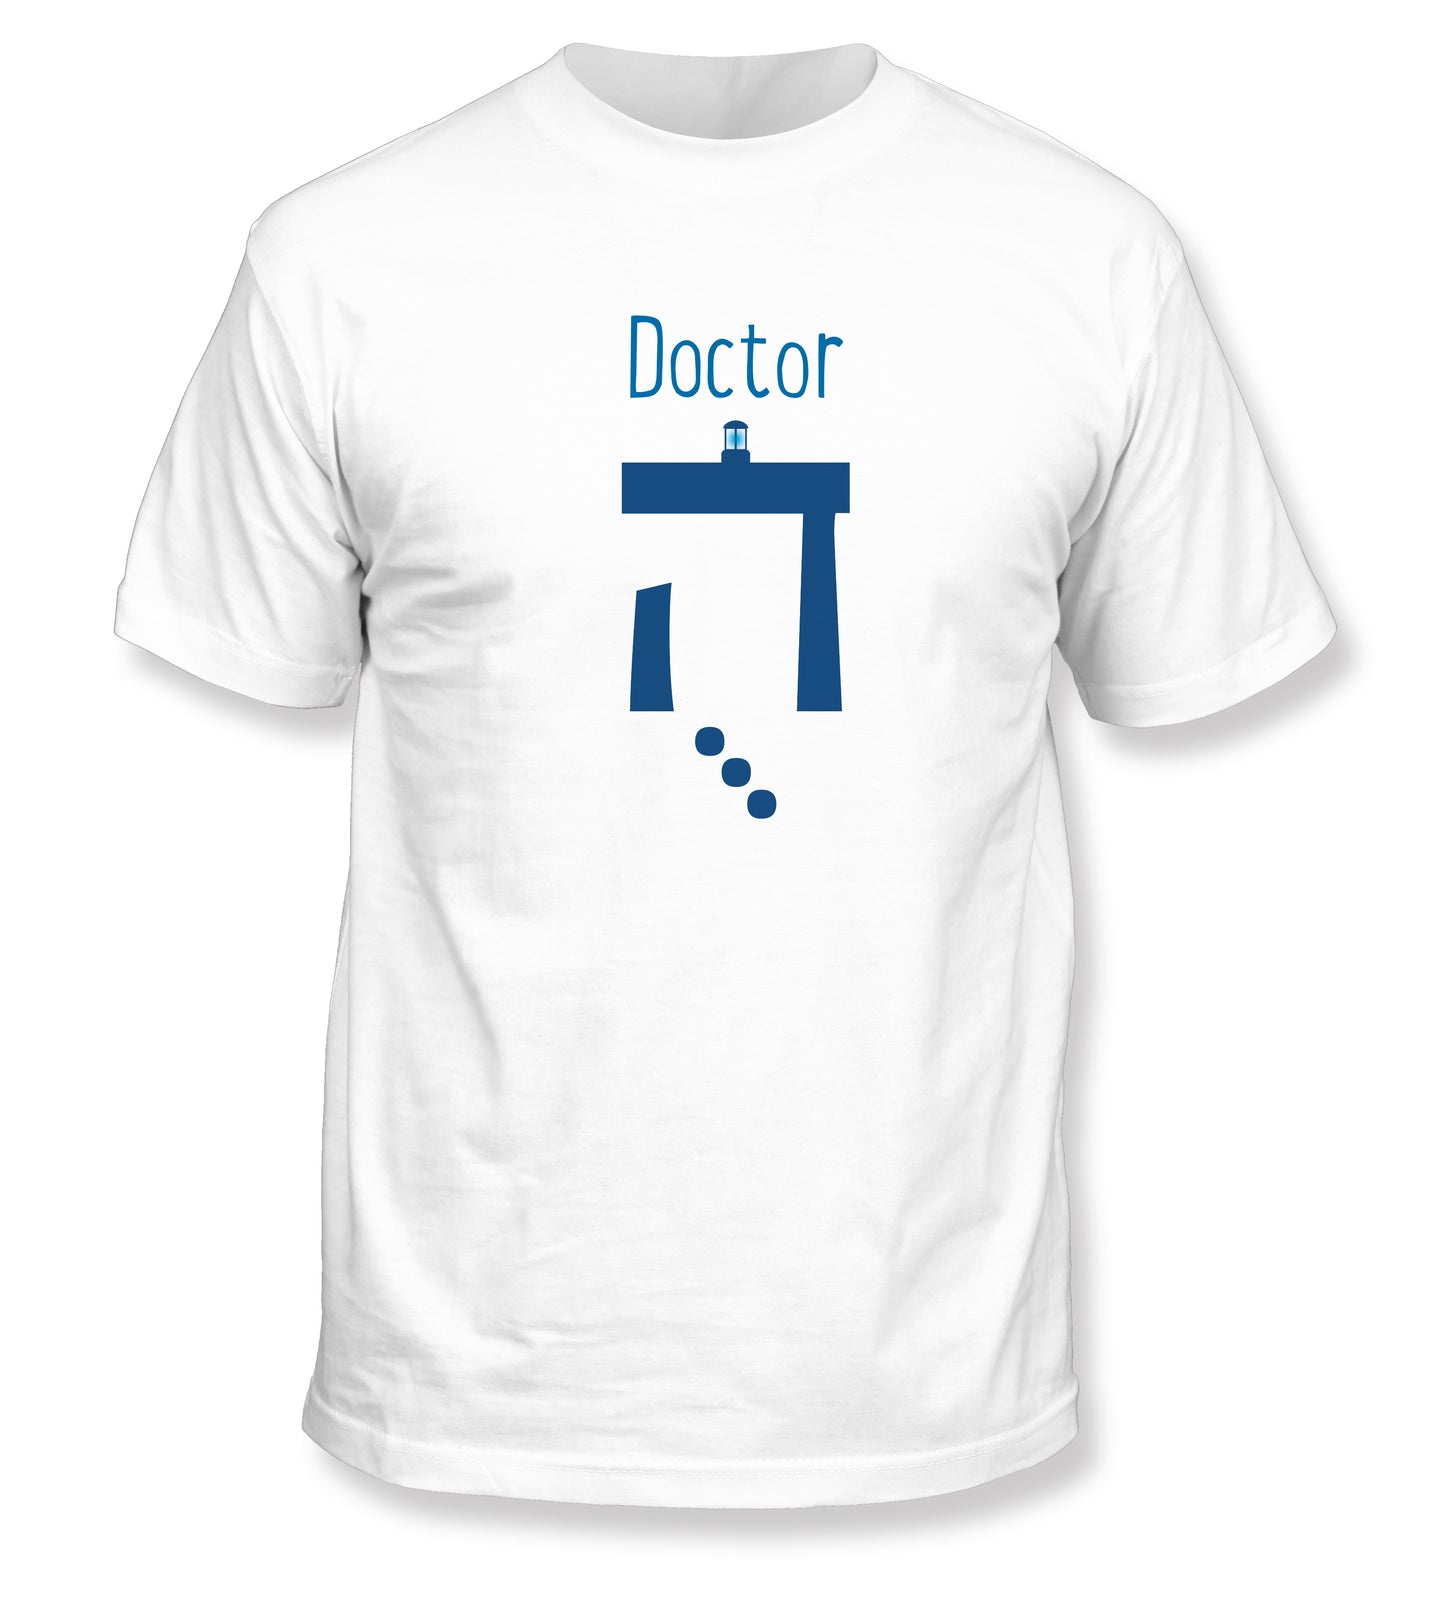 The Doctor T-Shirt